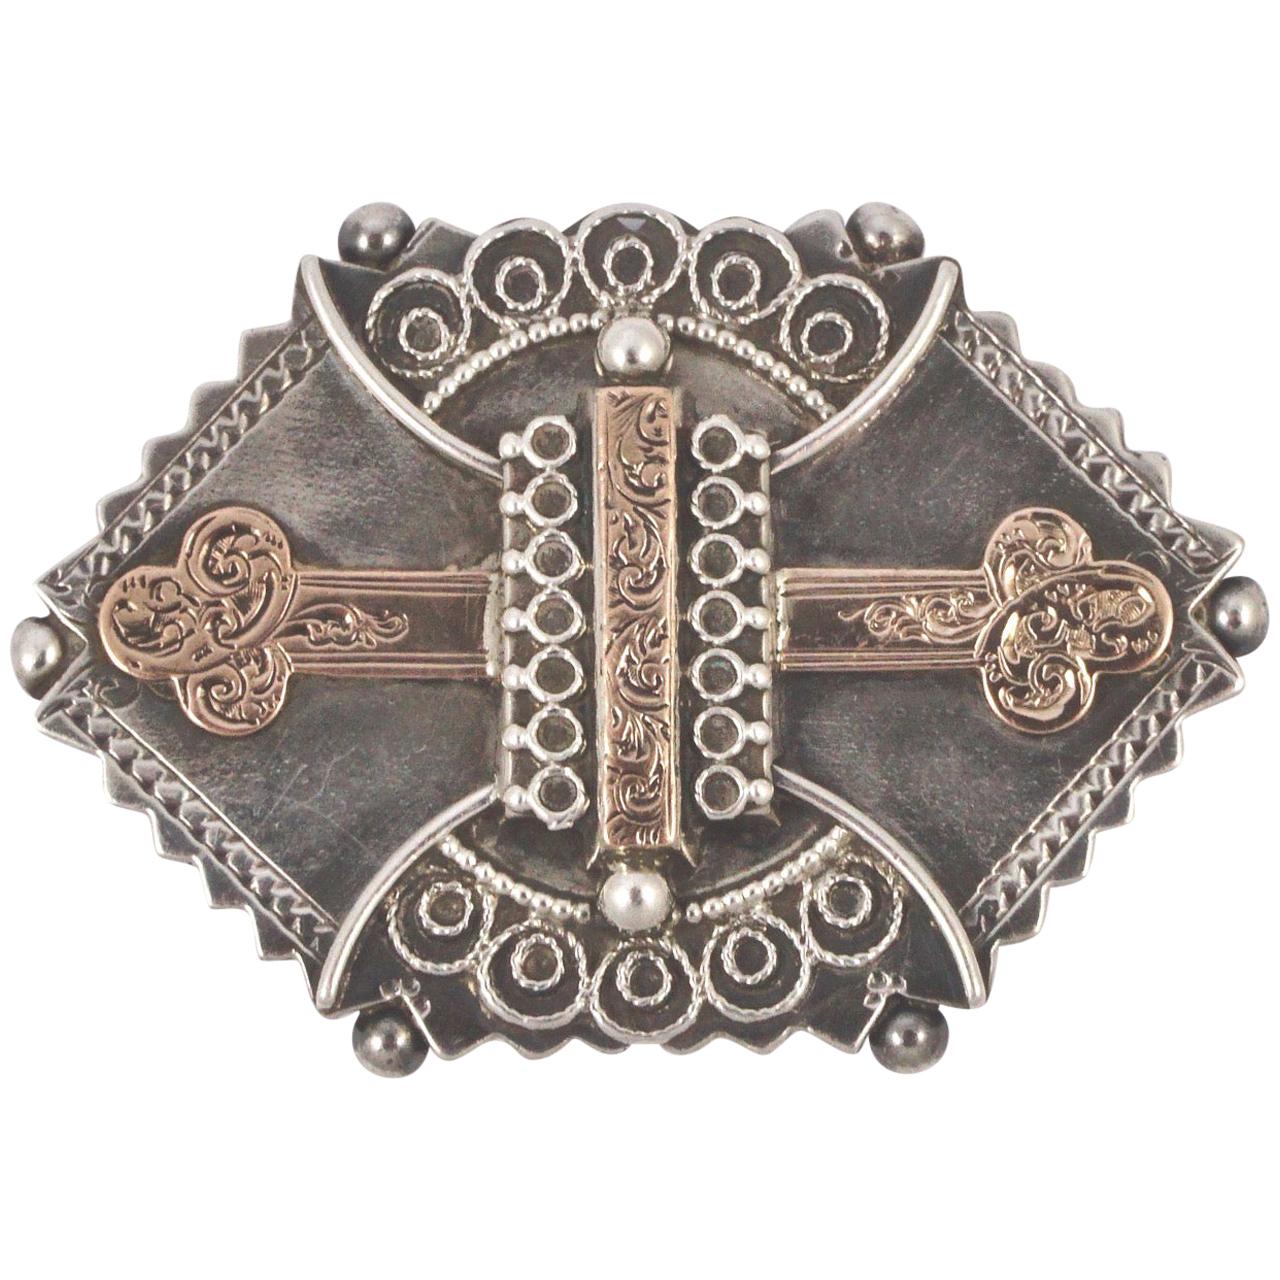 Antique Victorian Sterling Silver and Rose Gold Ornate Engraved Brooch